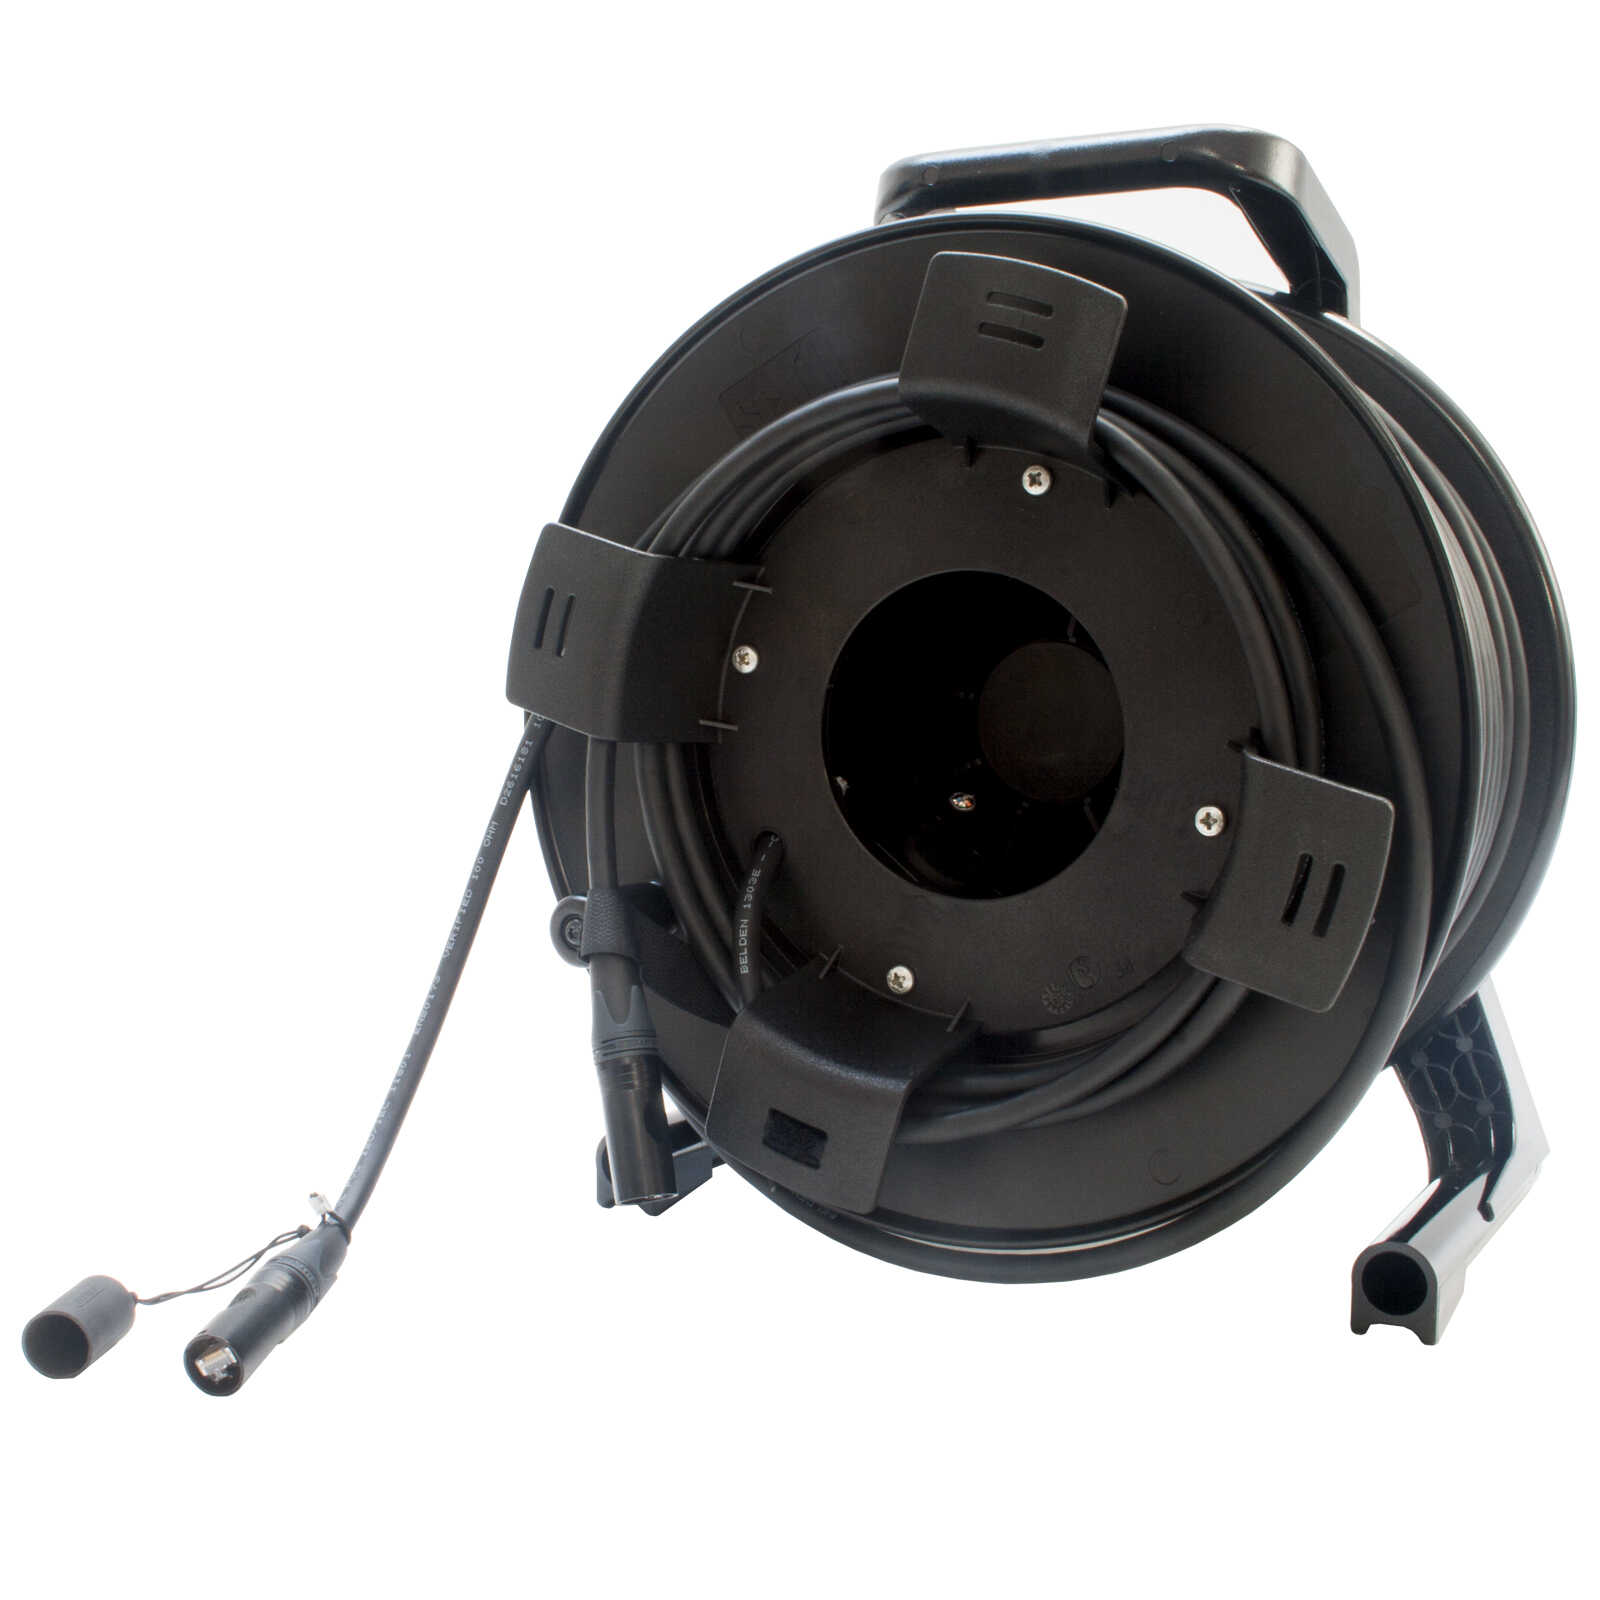 MarkerReel Connect-N-Go CAT6A Tactical Cable Reel with etherCON